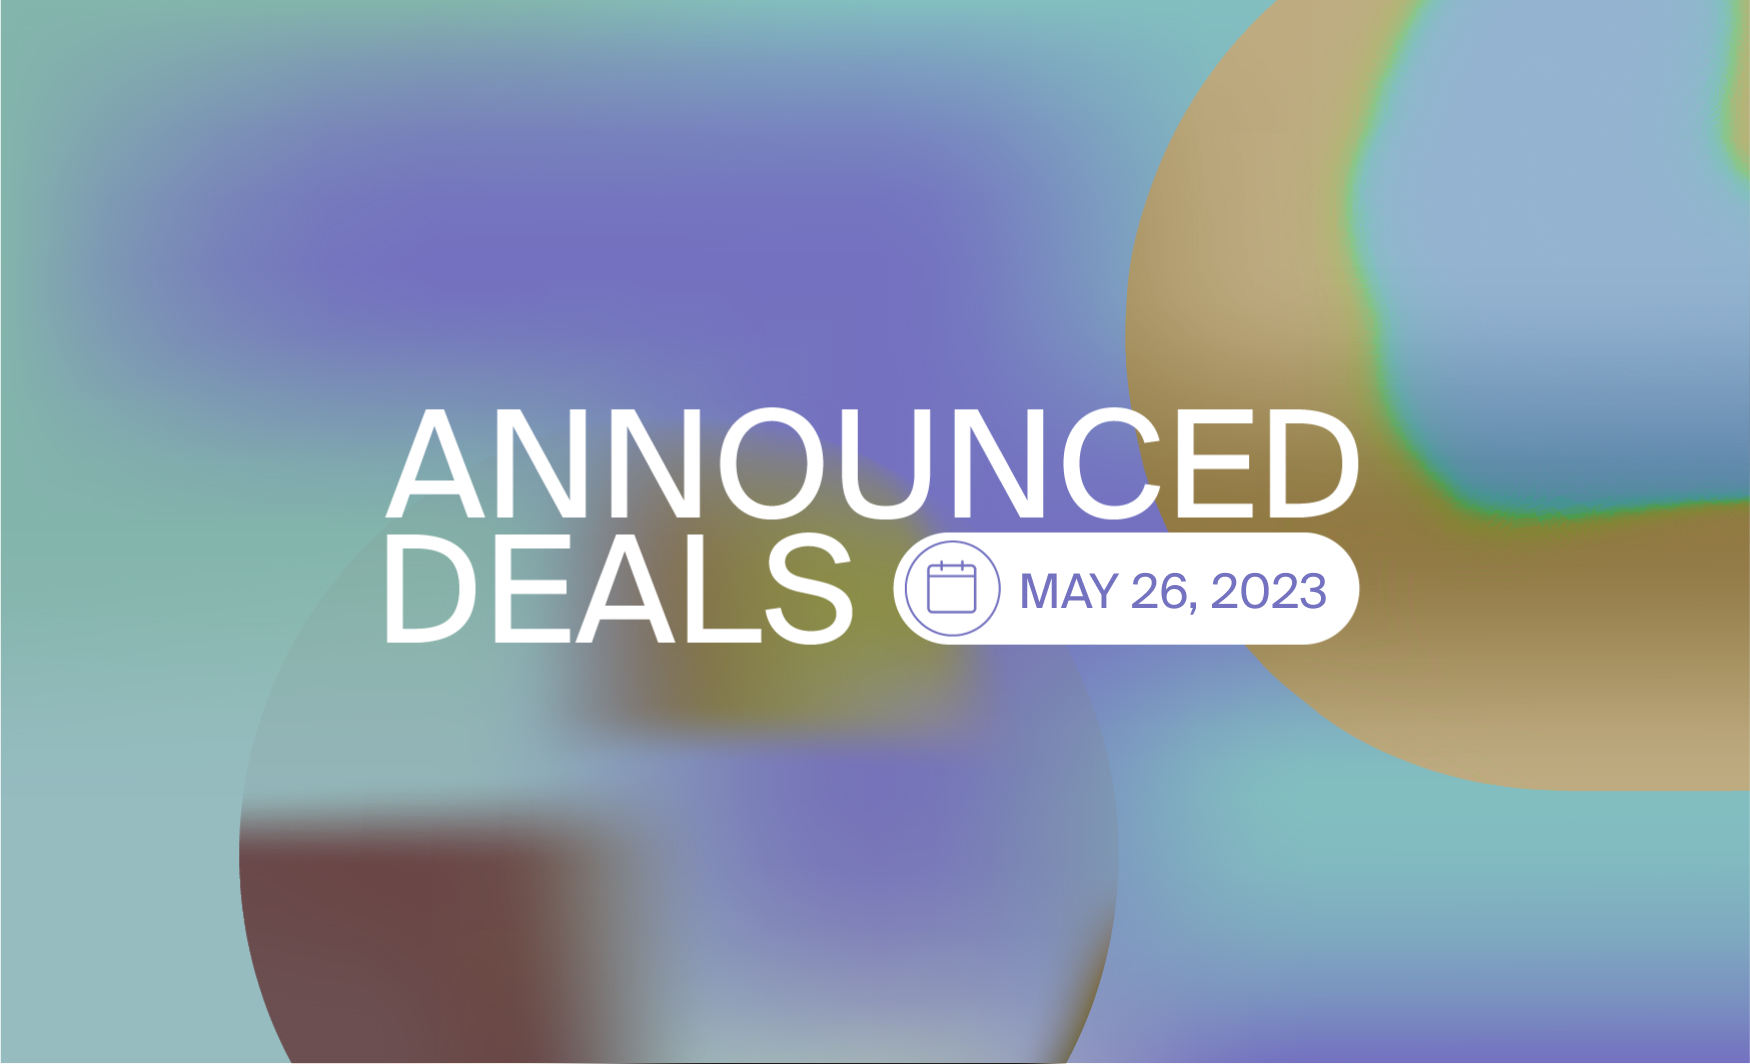 Friday's announced financing: May 26